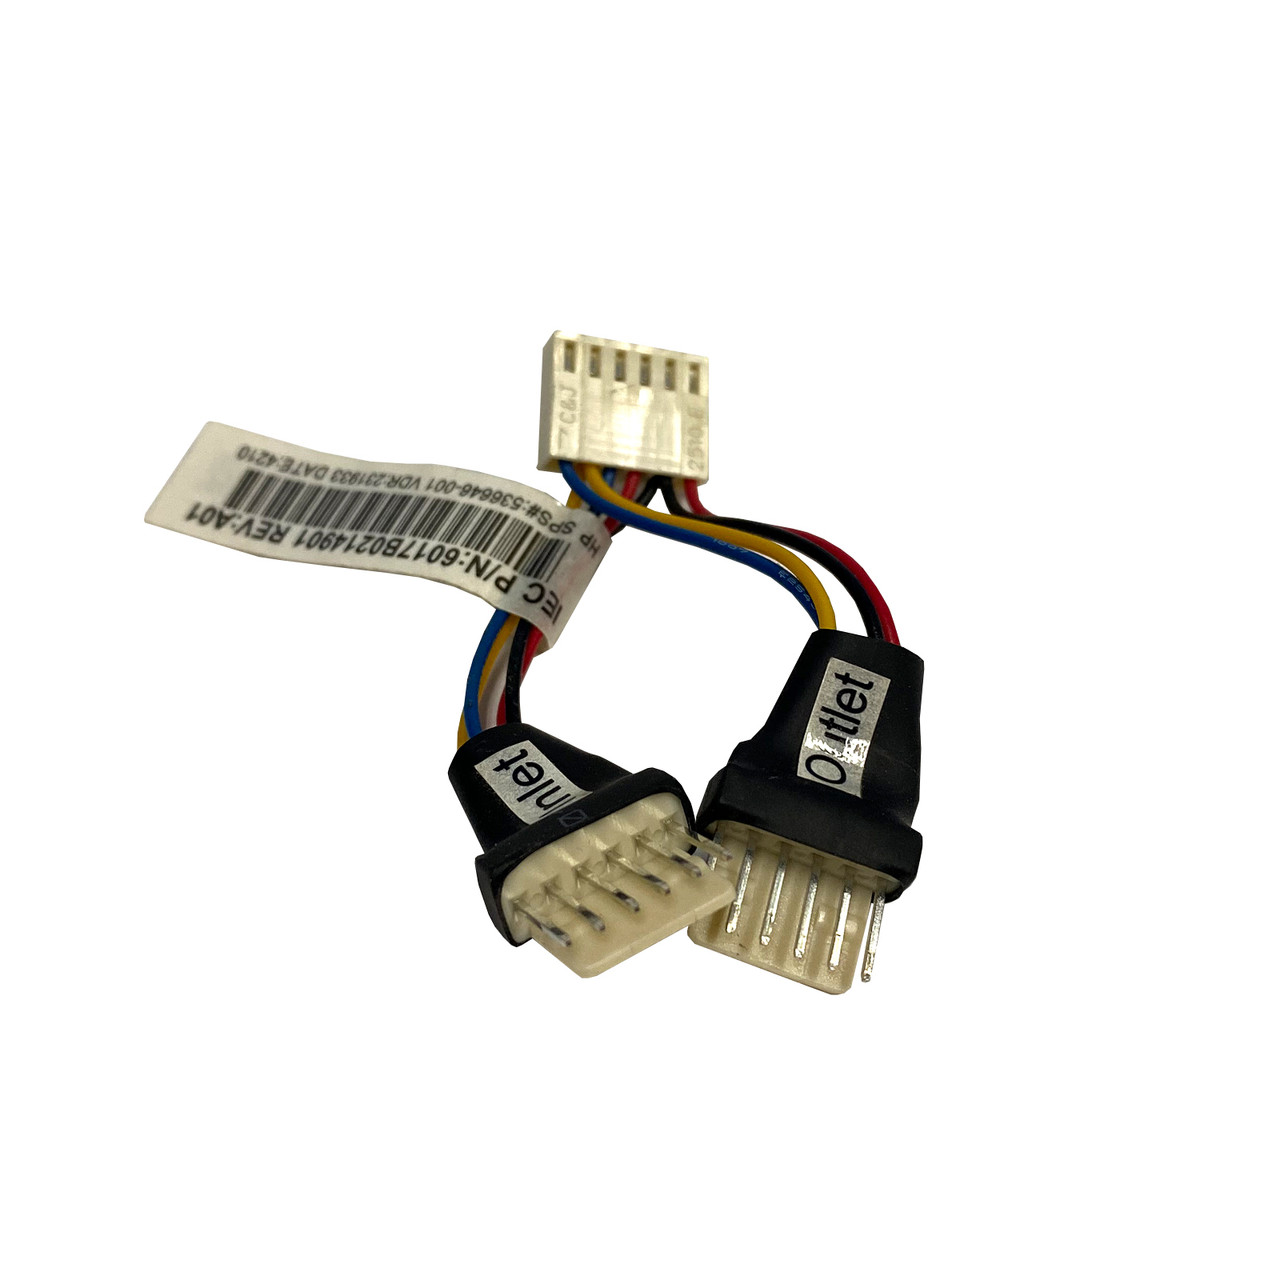 HP 536646-001 DL180 G6 Fan Y Cable